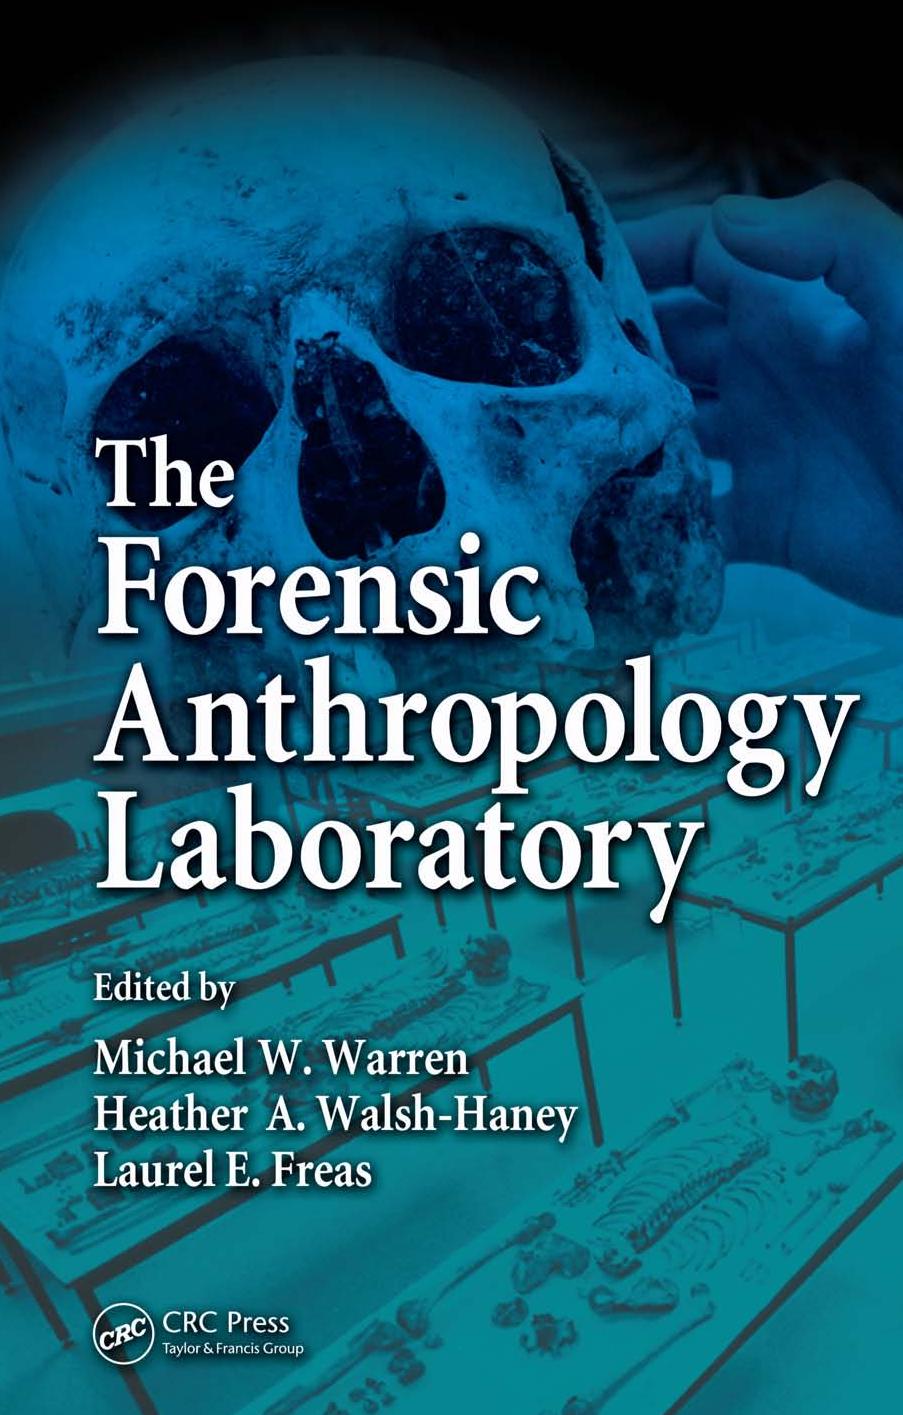 The Forensic Anthropology Laboratory 2008.pdf